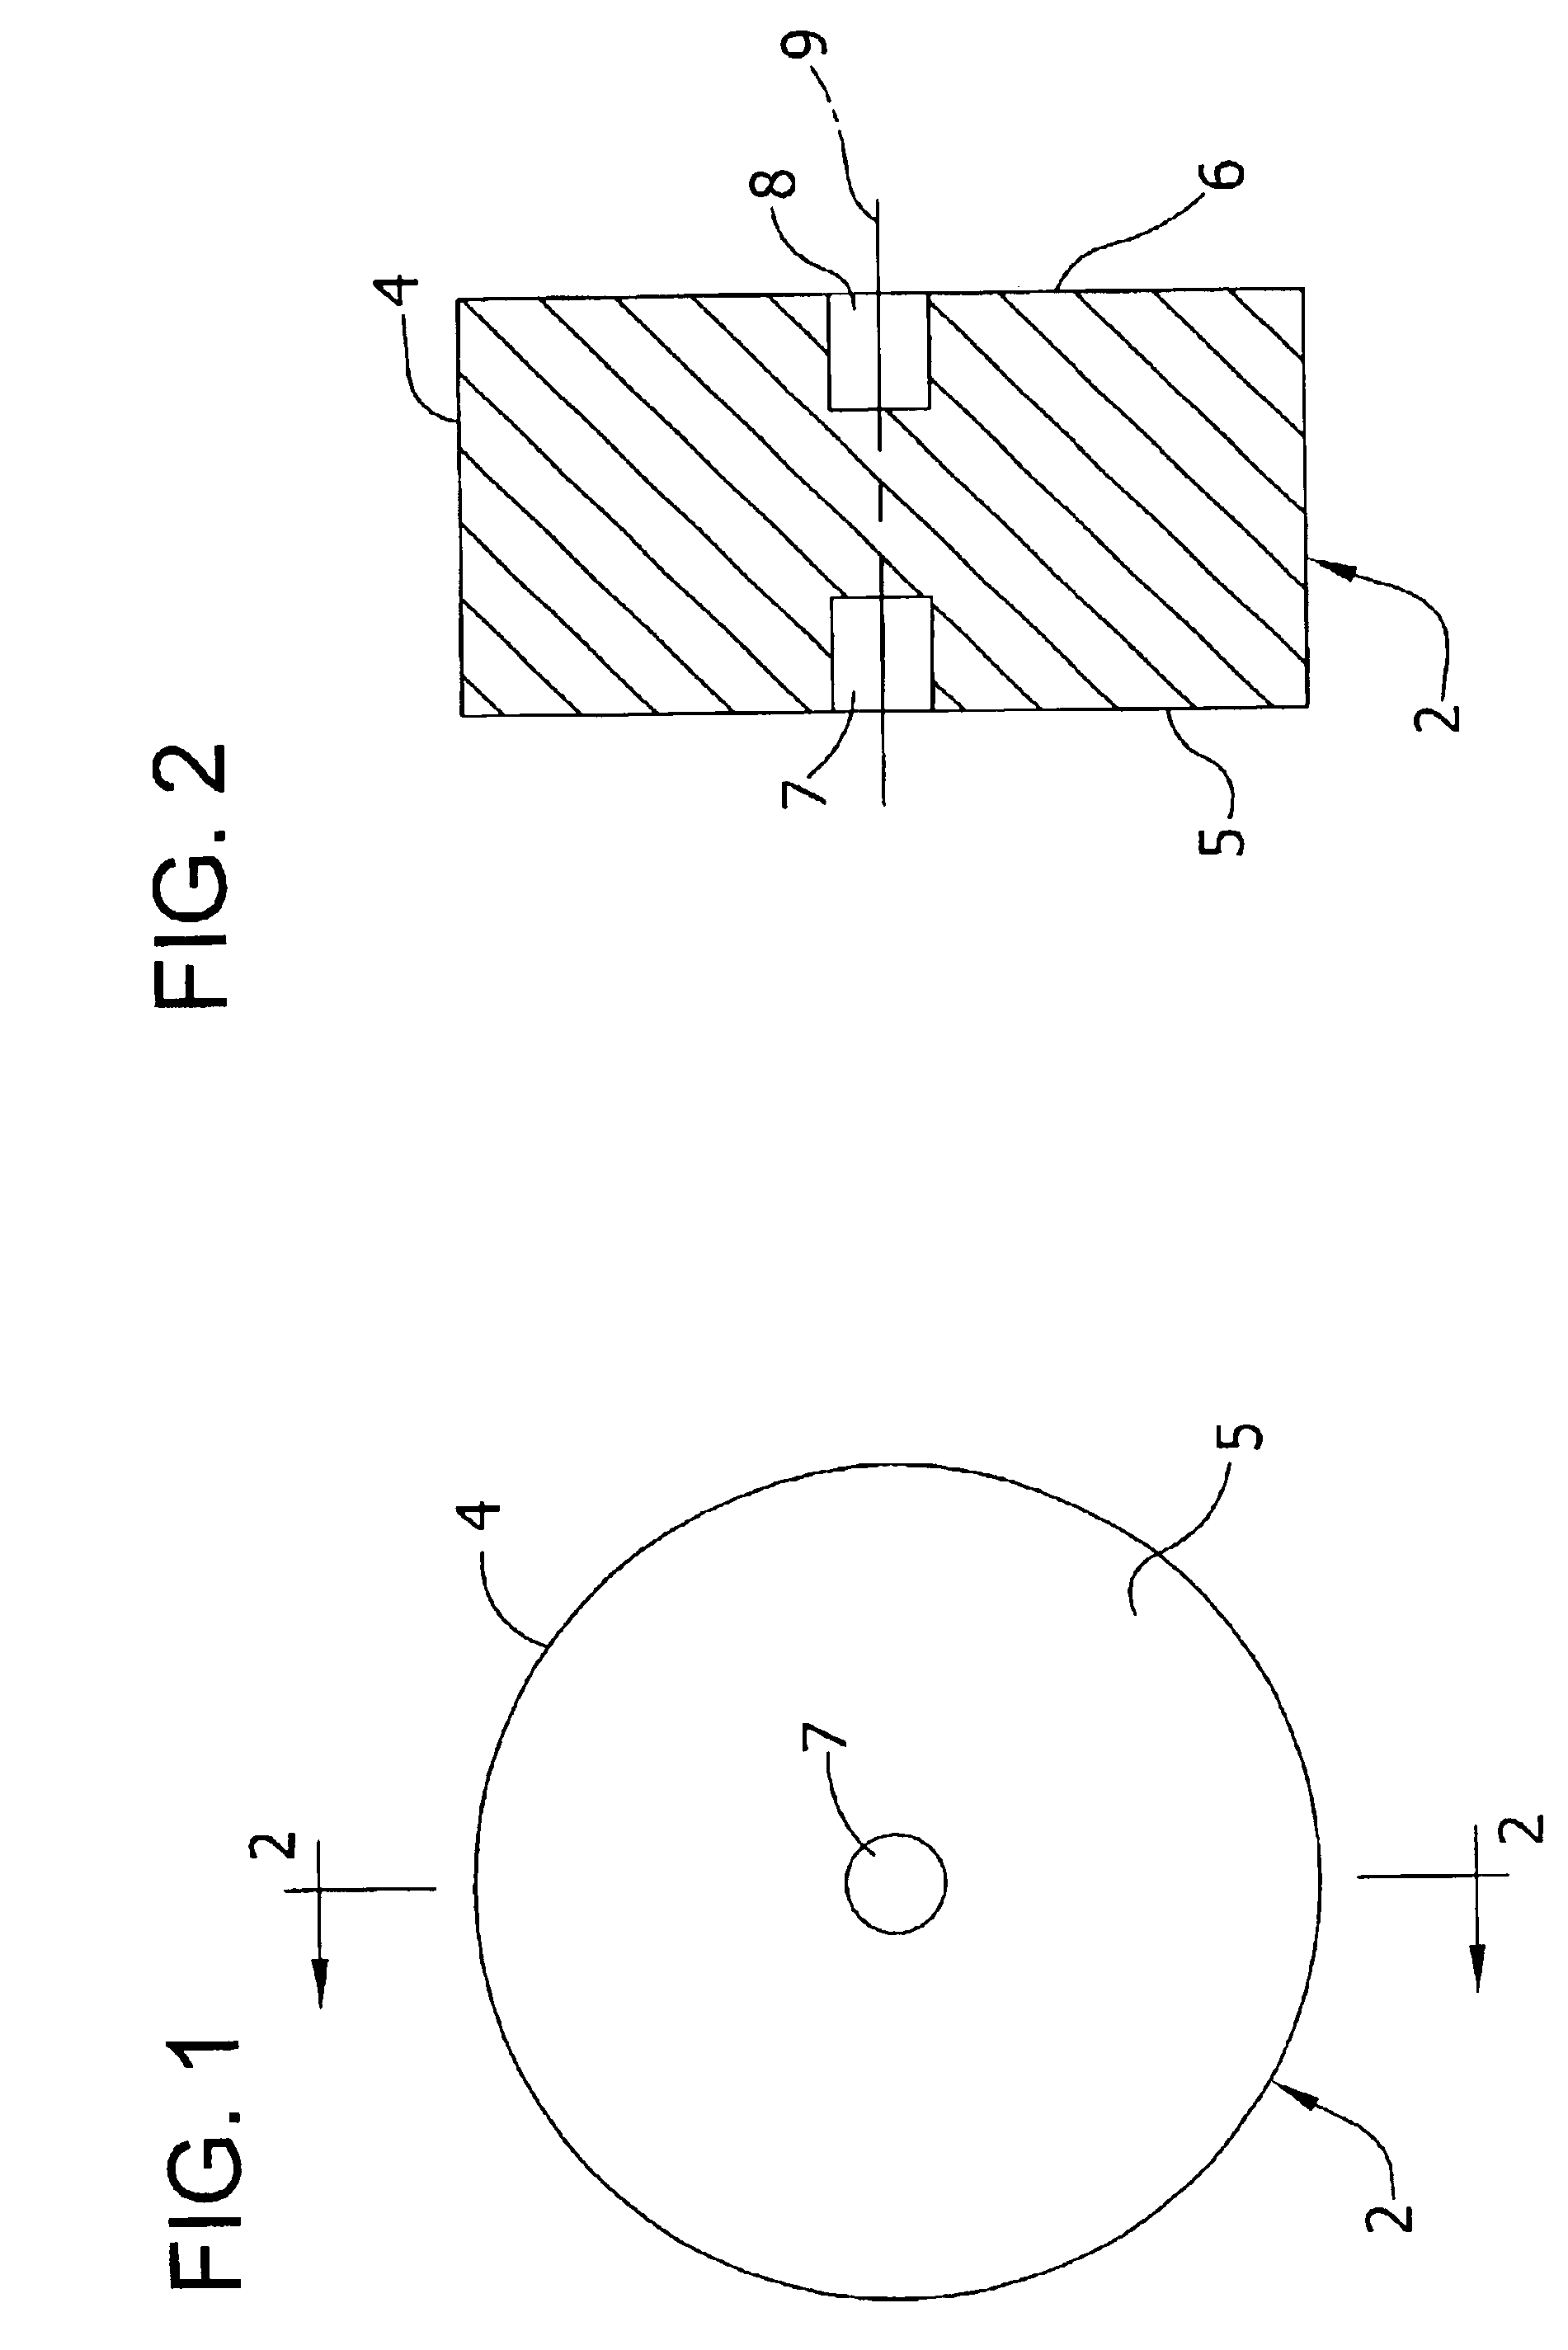 Ultrasonic horn with isotropic breathing characteristics